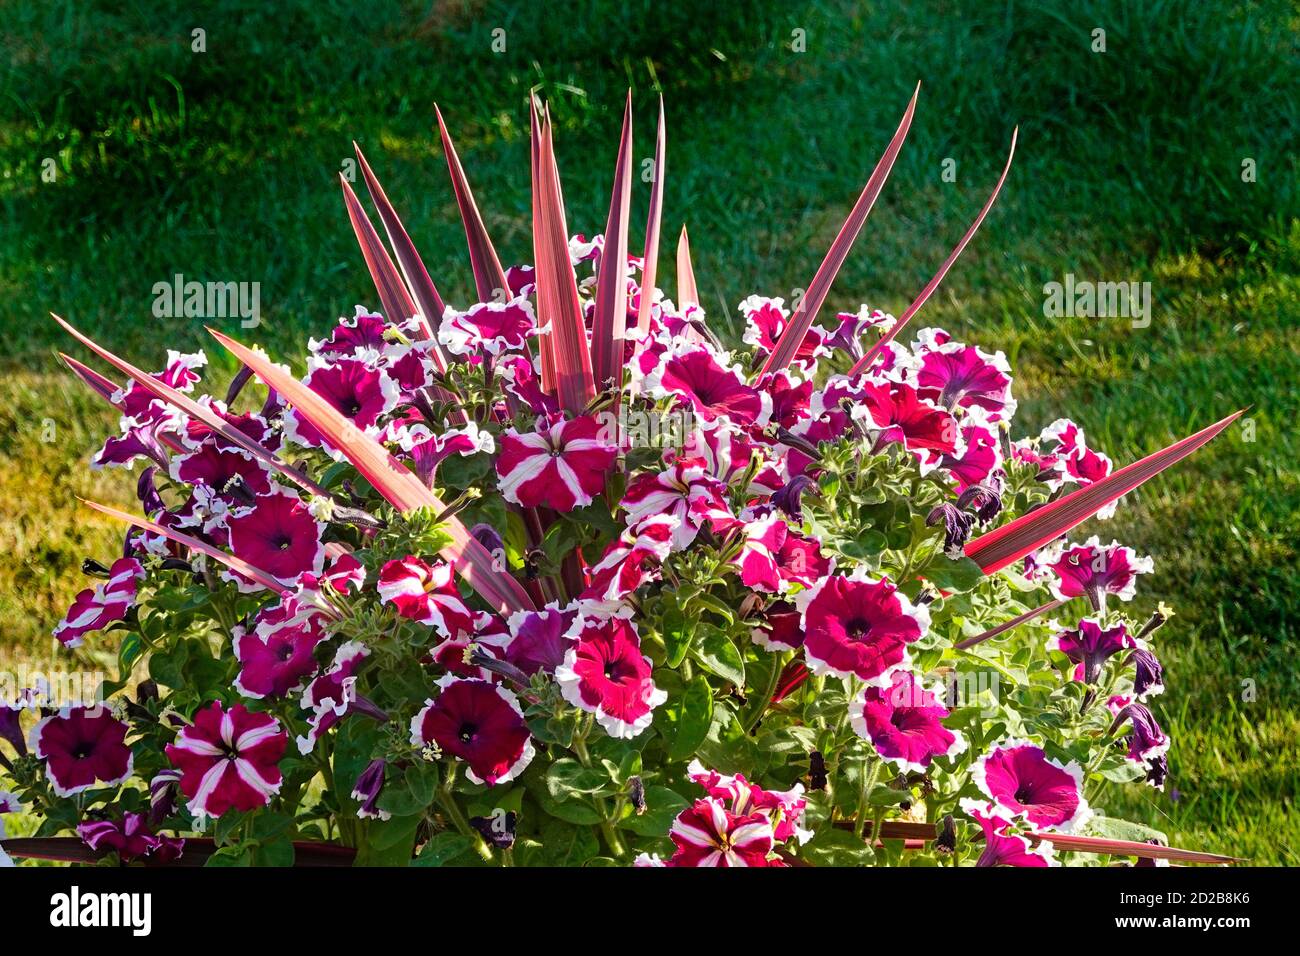 Spikes of leaves on perennial red cordyline australis plant in pot poking out from surround of a colourful display of annual petunia garden flowers UK Stock Photo